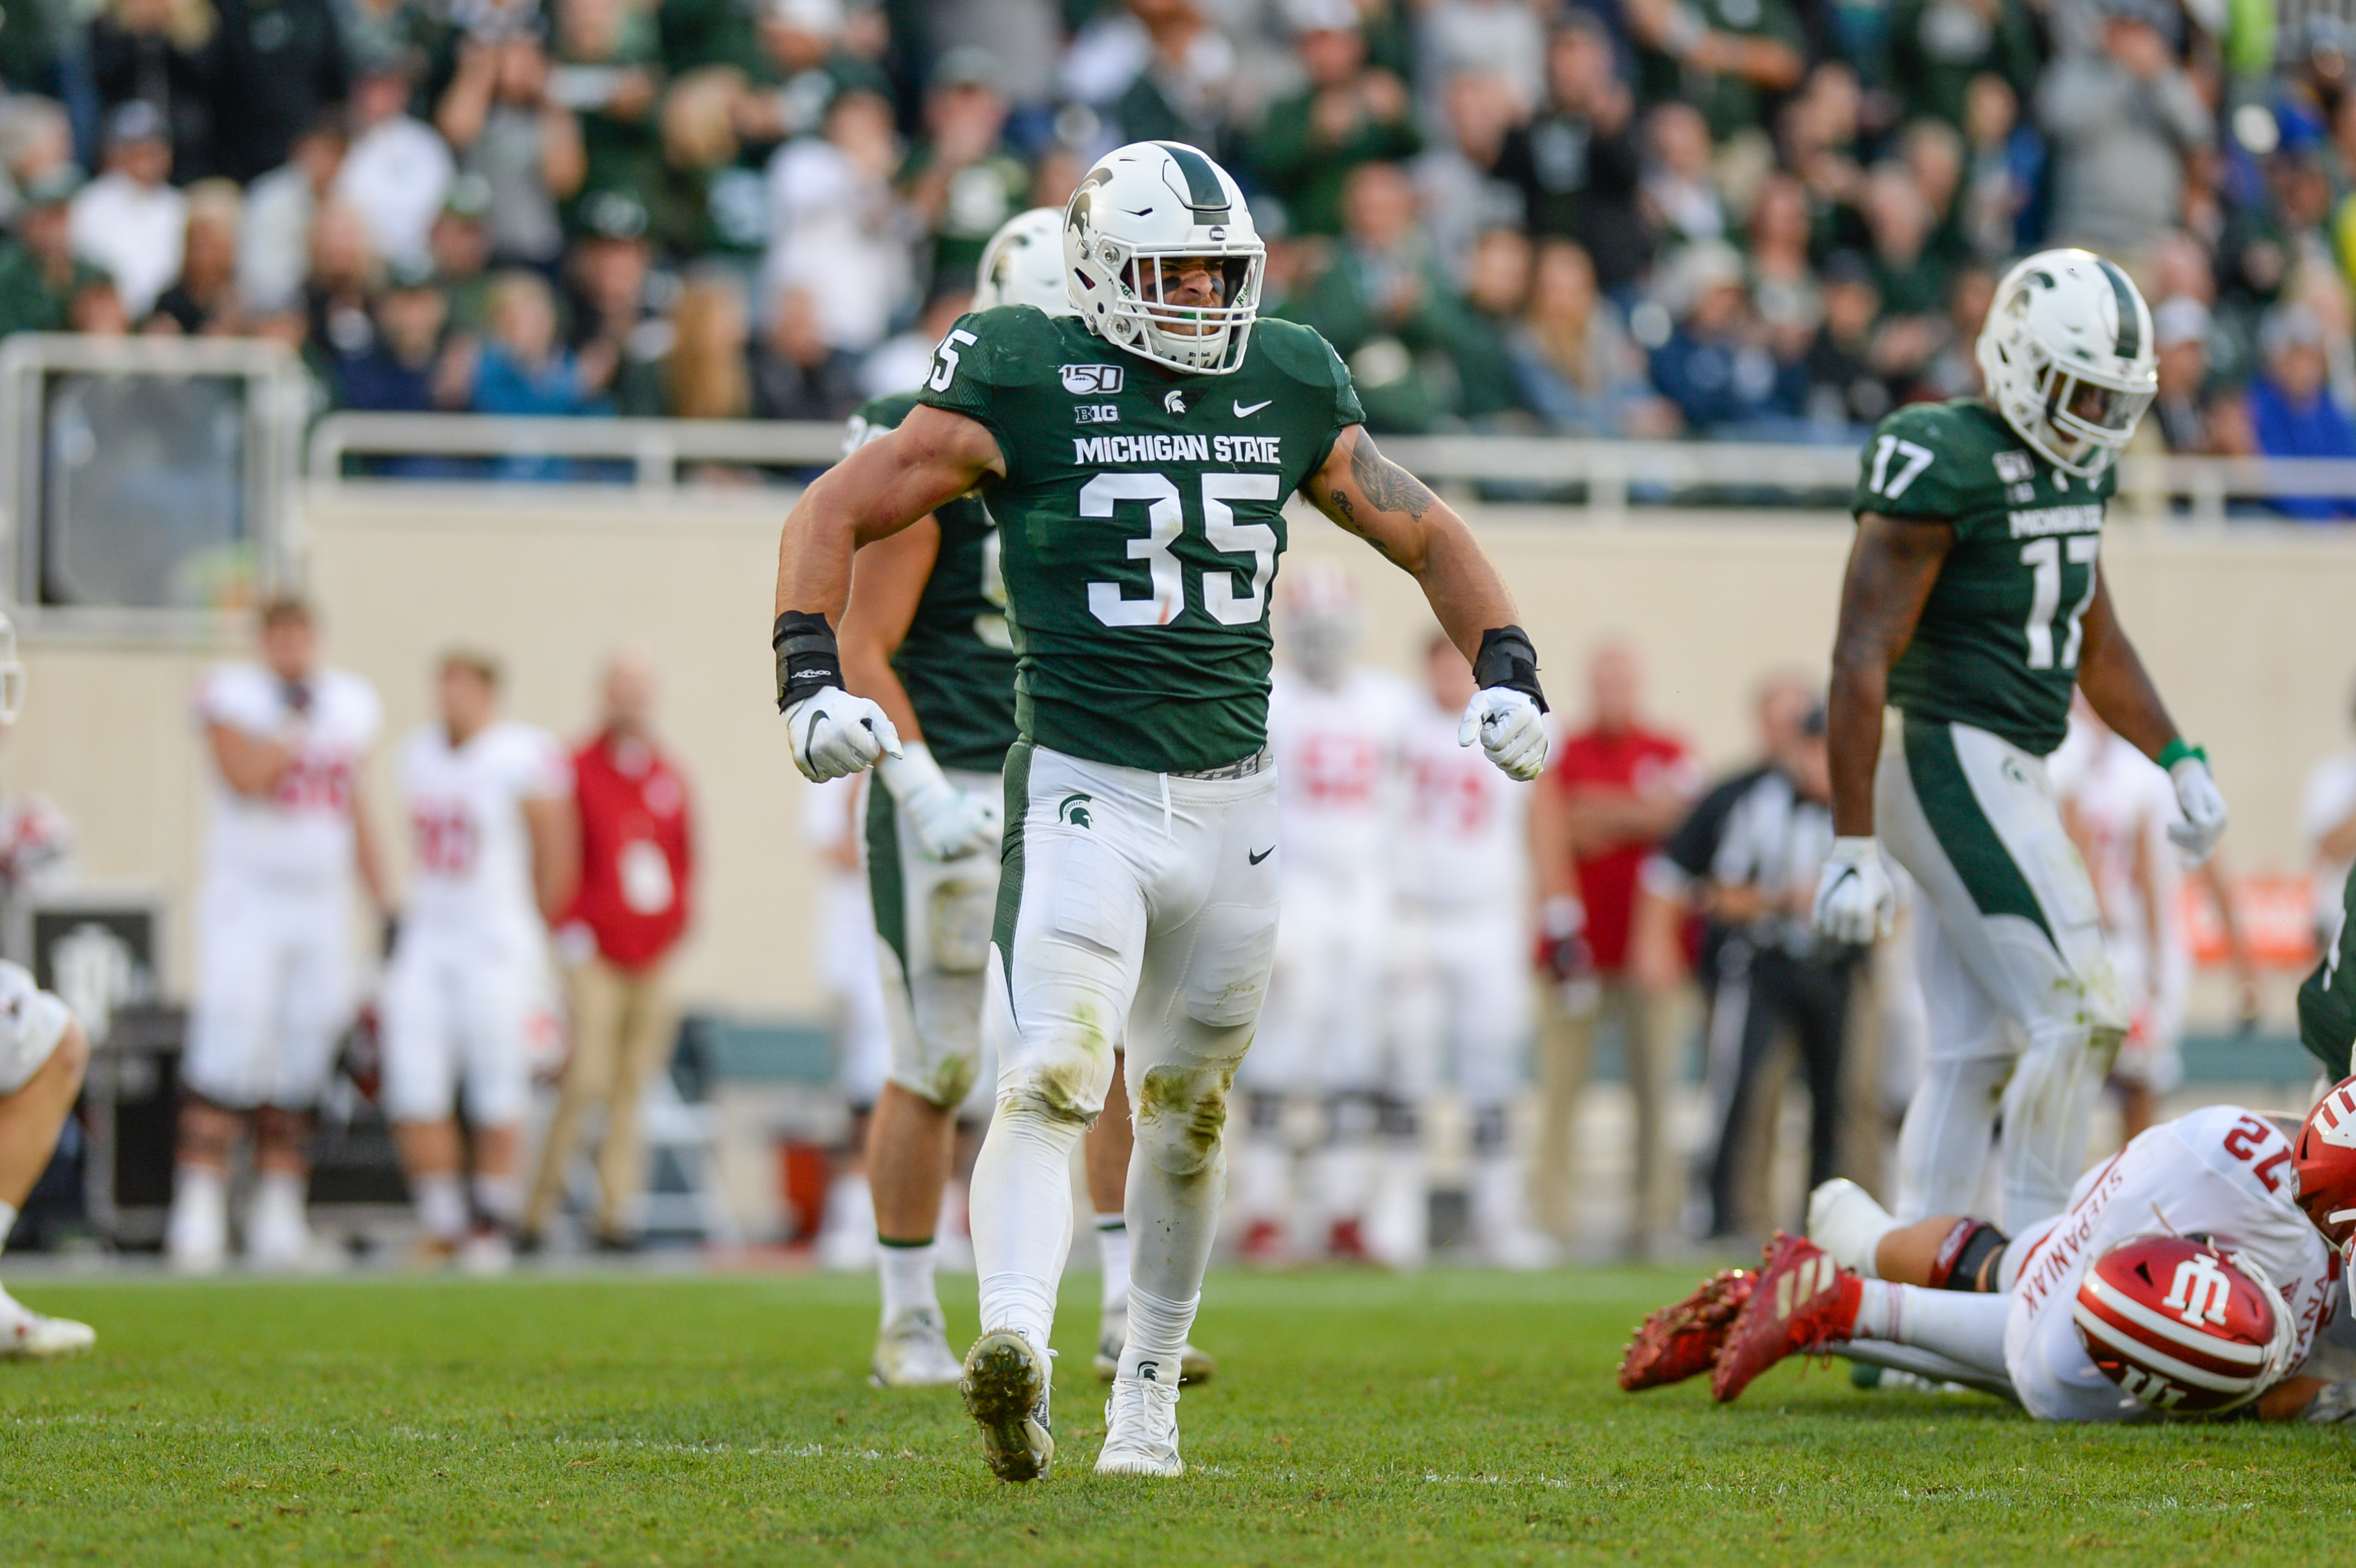 COLLEGE FOOTBALL: SEP 28 Indiana at Michigan State